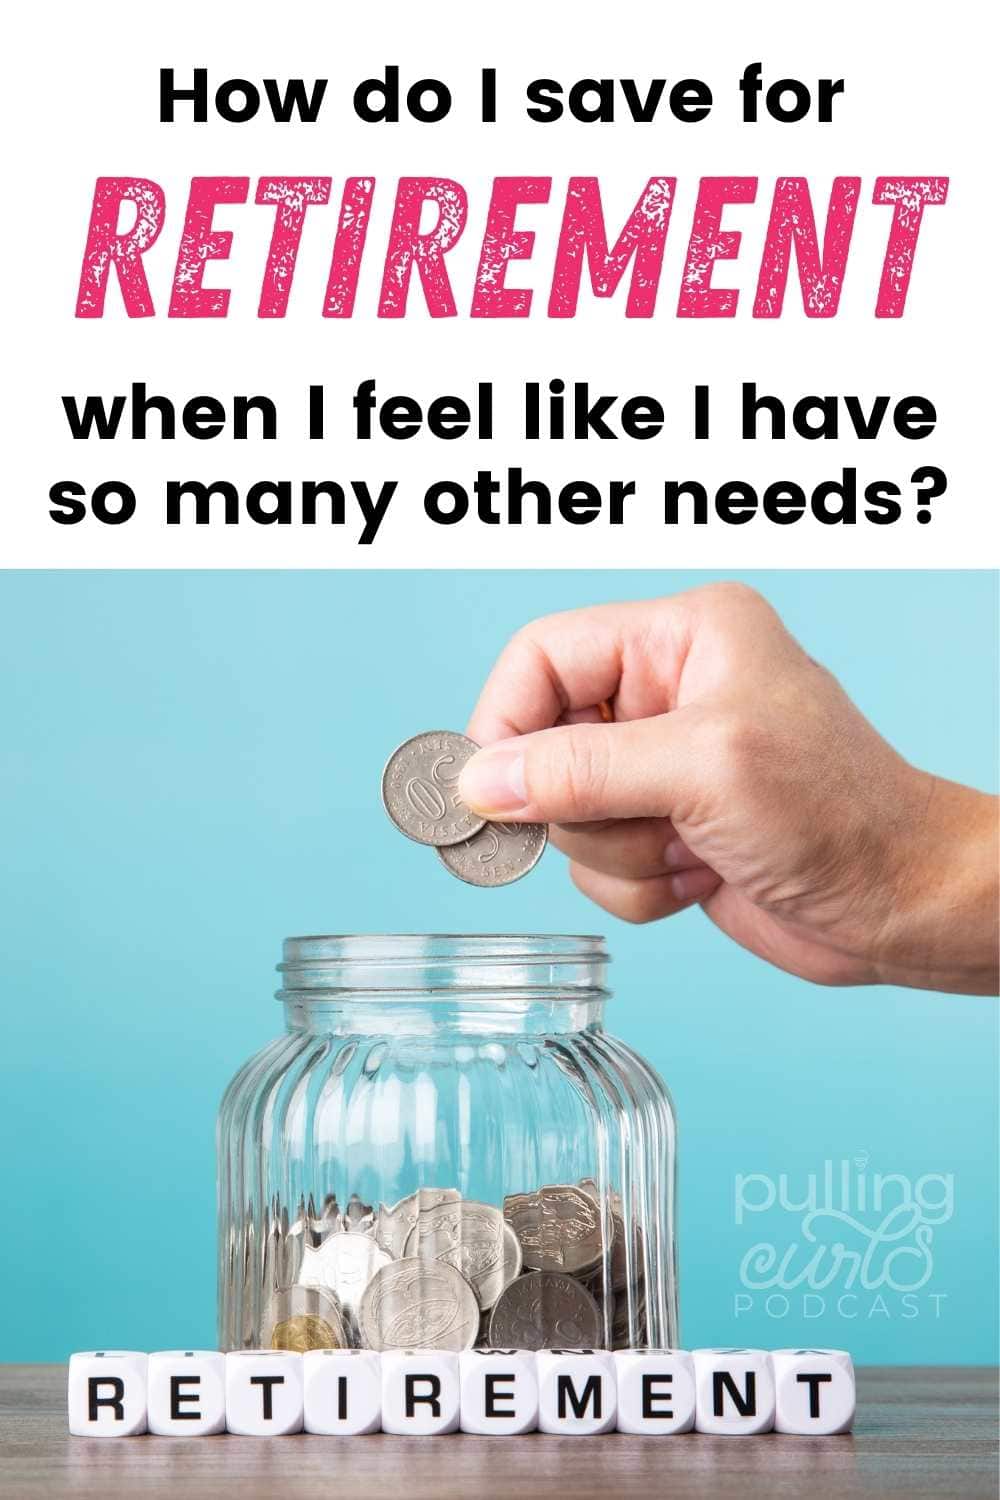 How should we be saving for retirement when there are so many other needs around us. via @pullingcurls